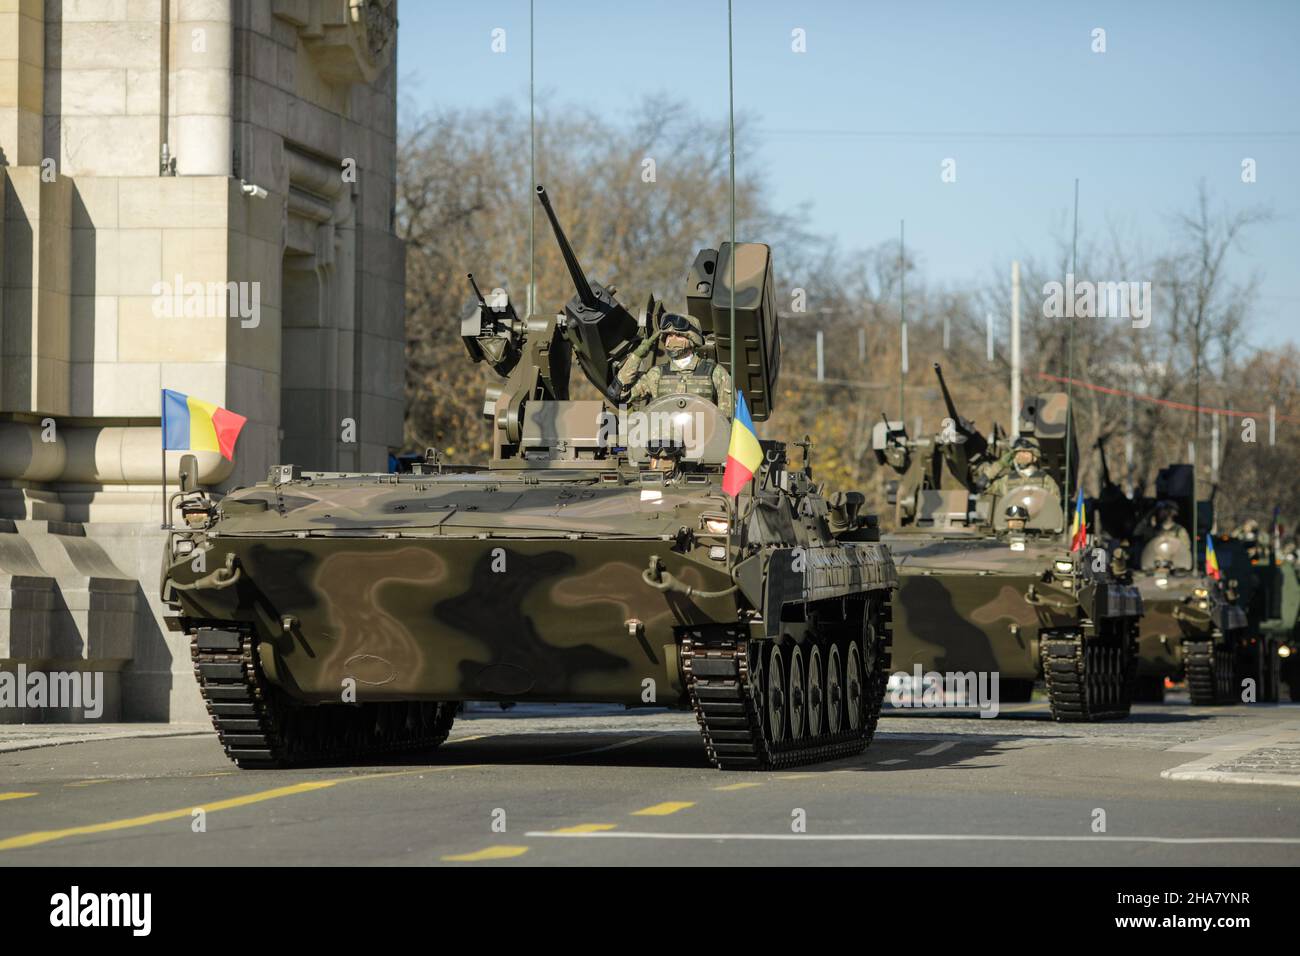 BUCHAREST, ROMANIA - December 1, 2021: MLI 84 M combat armored vehicle, at Romanian National Day military parade passes under the Arch of Triumph Stock Photo